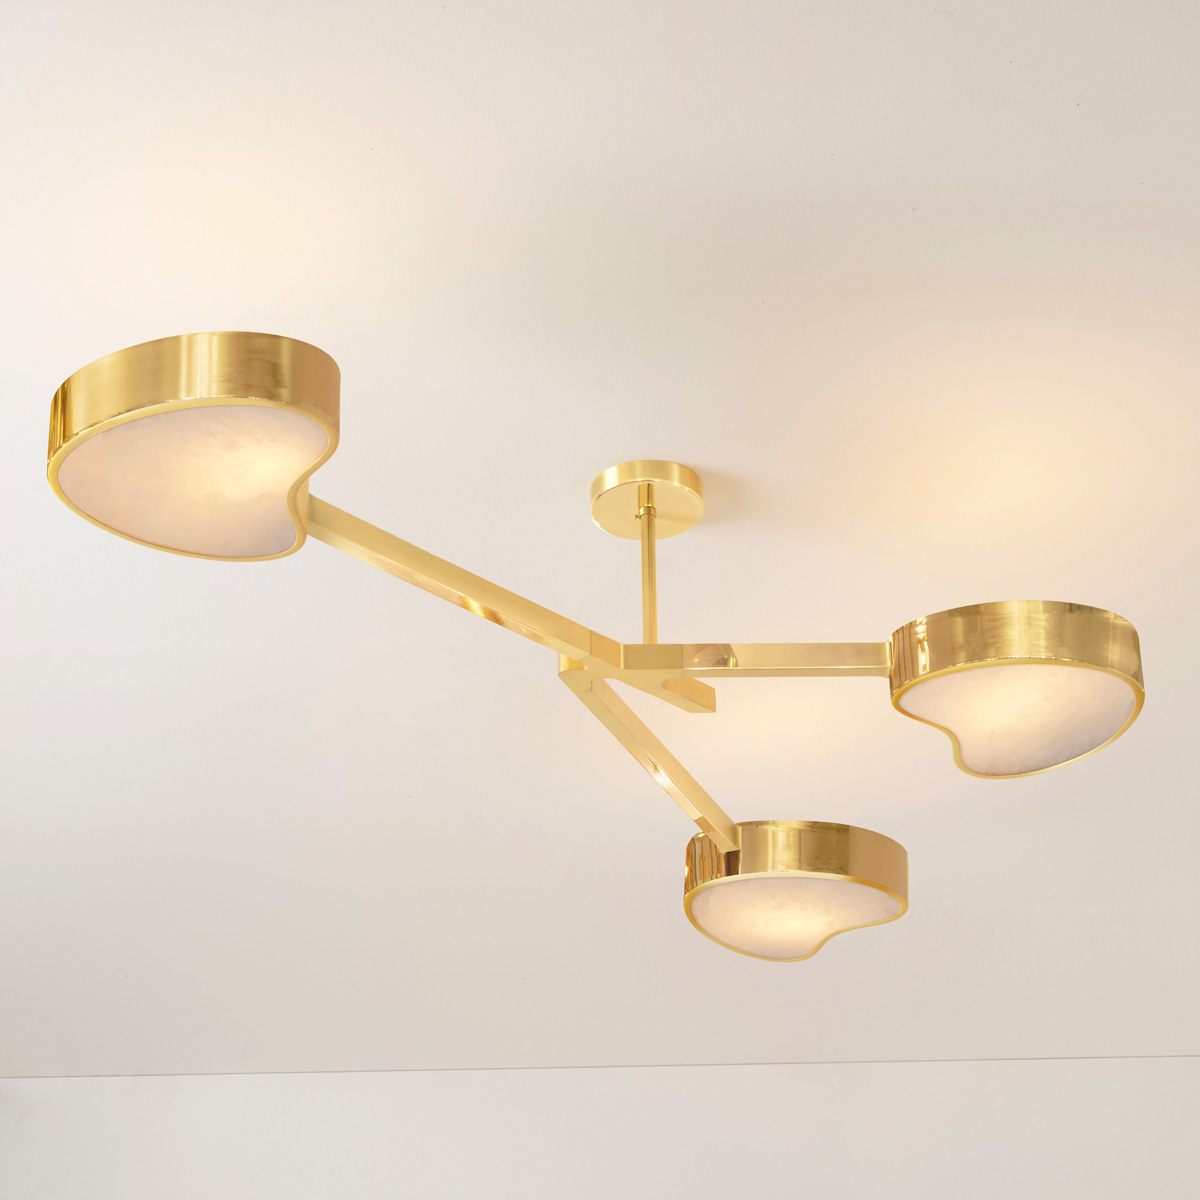 Cuore N3 ceiling light by gaspare asaro